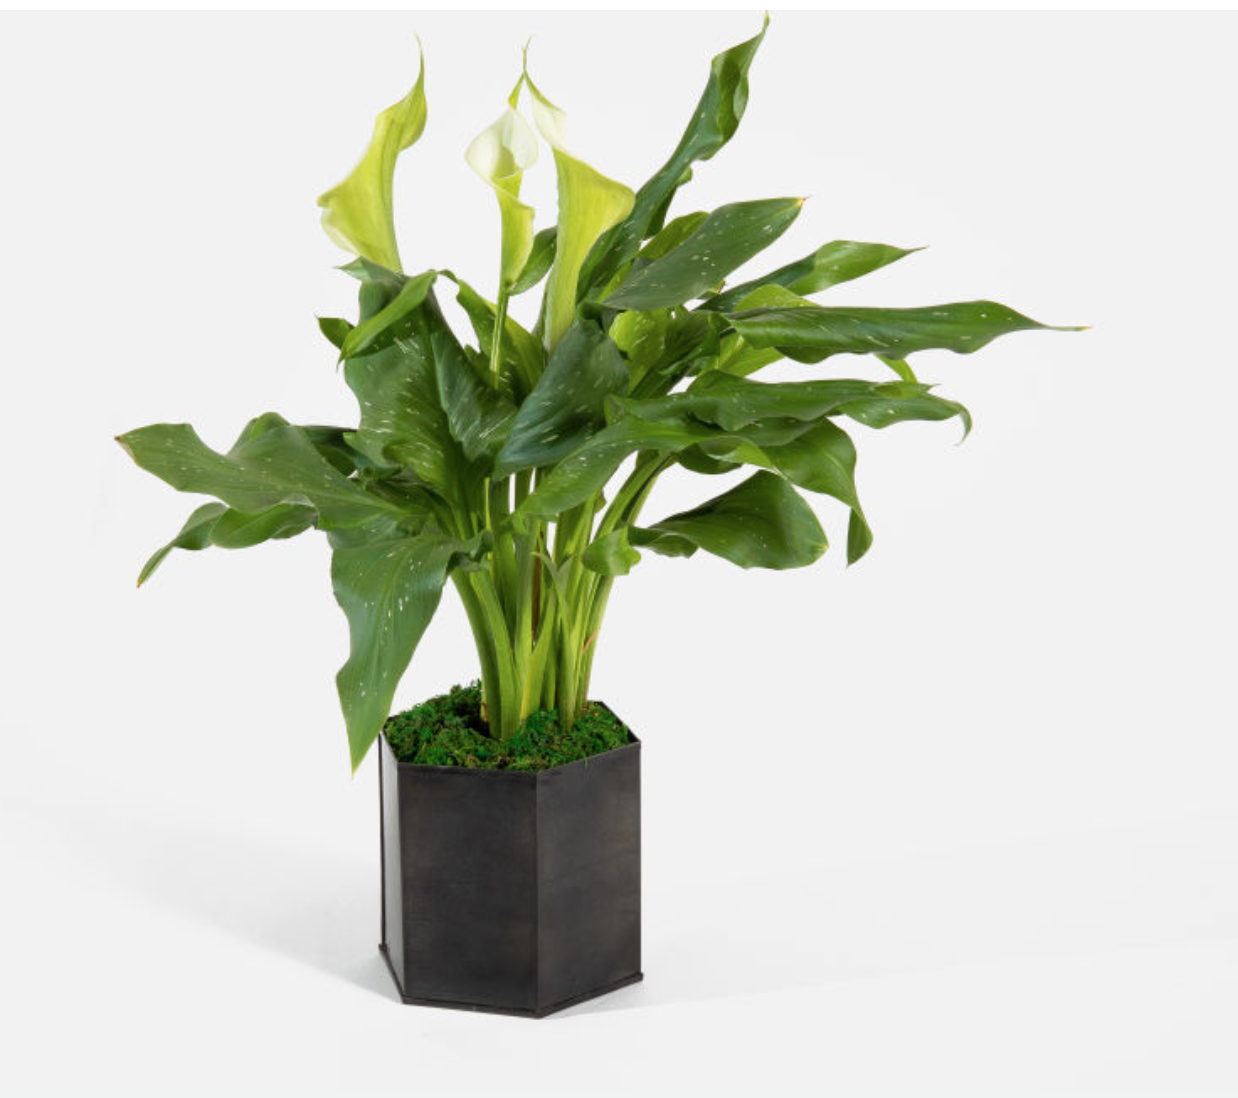 Our luxury gift guide of the best plants and greenery